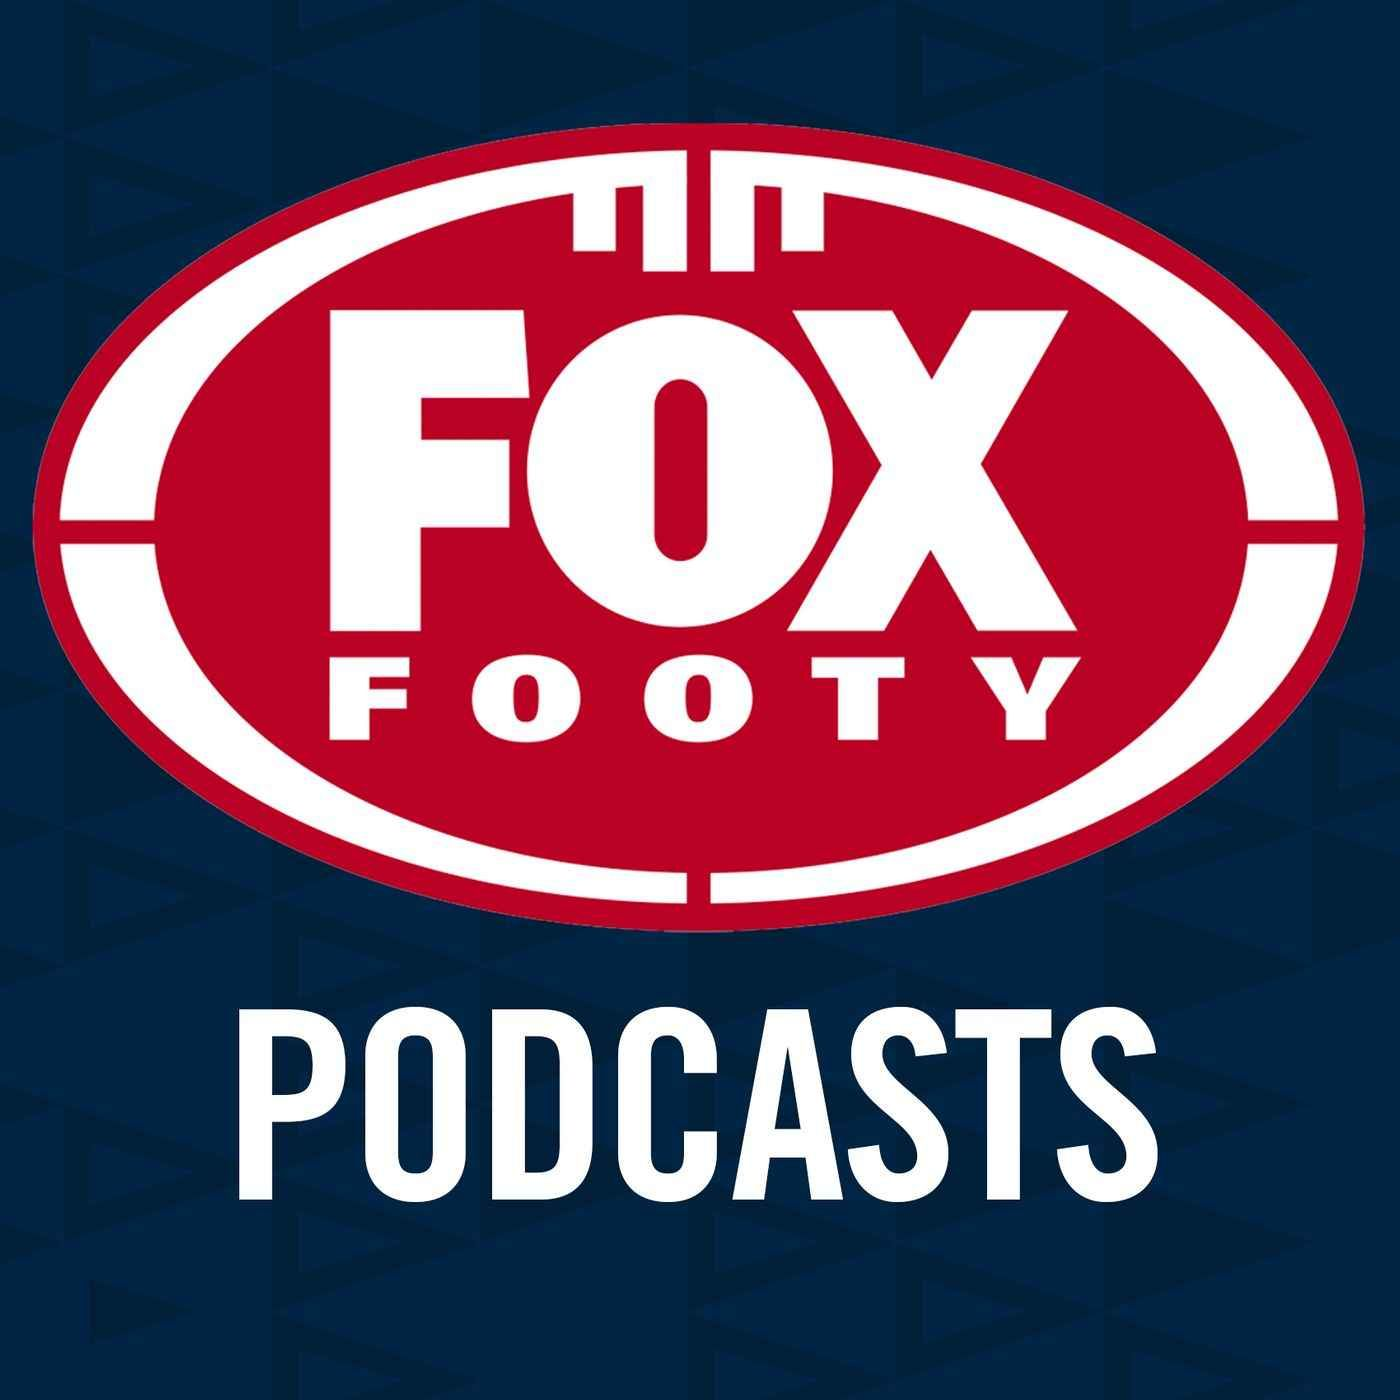 Fox Footy Live: Richmond Tigers assistant coach Justin Leppitsch on the tough times ahead